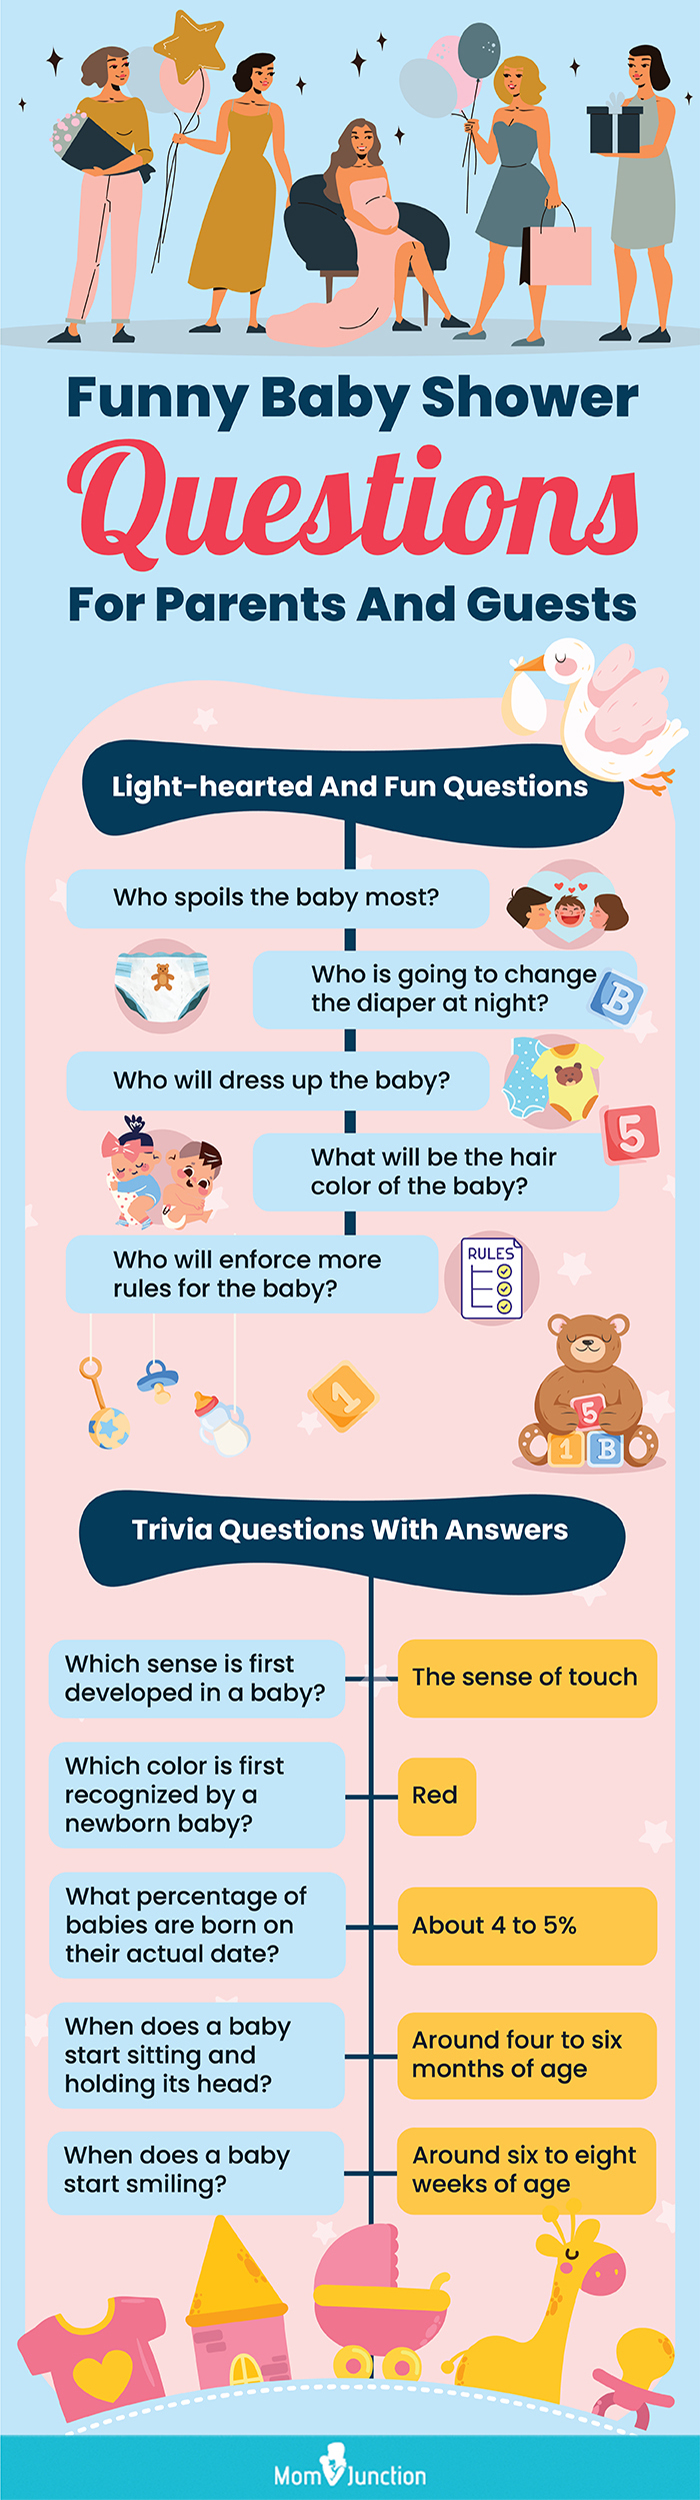 funny baby shower questions for parents and guests (infographic)